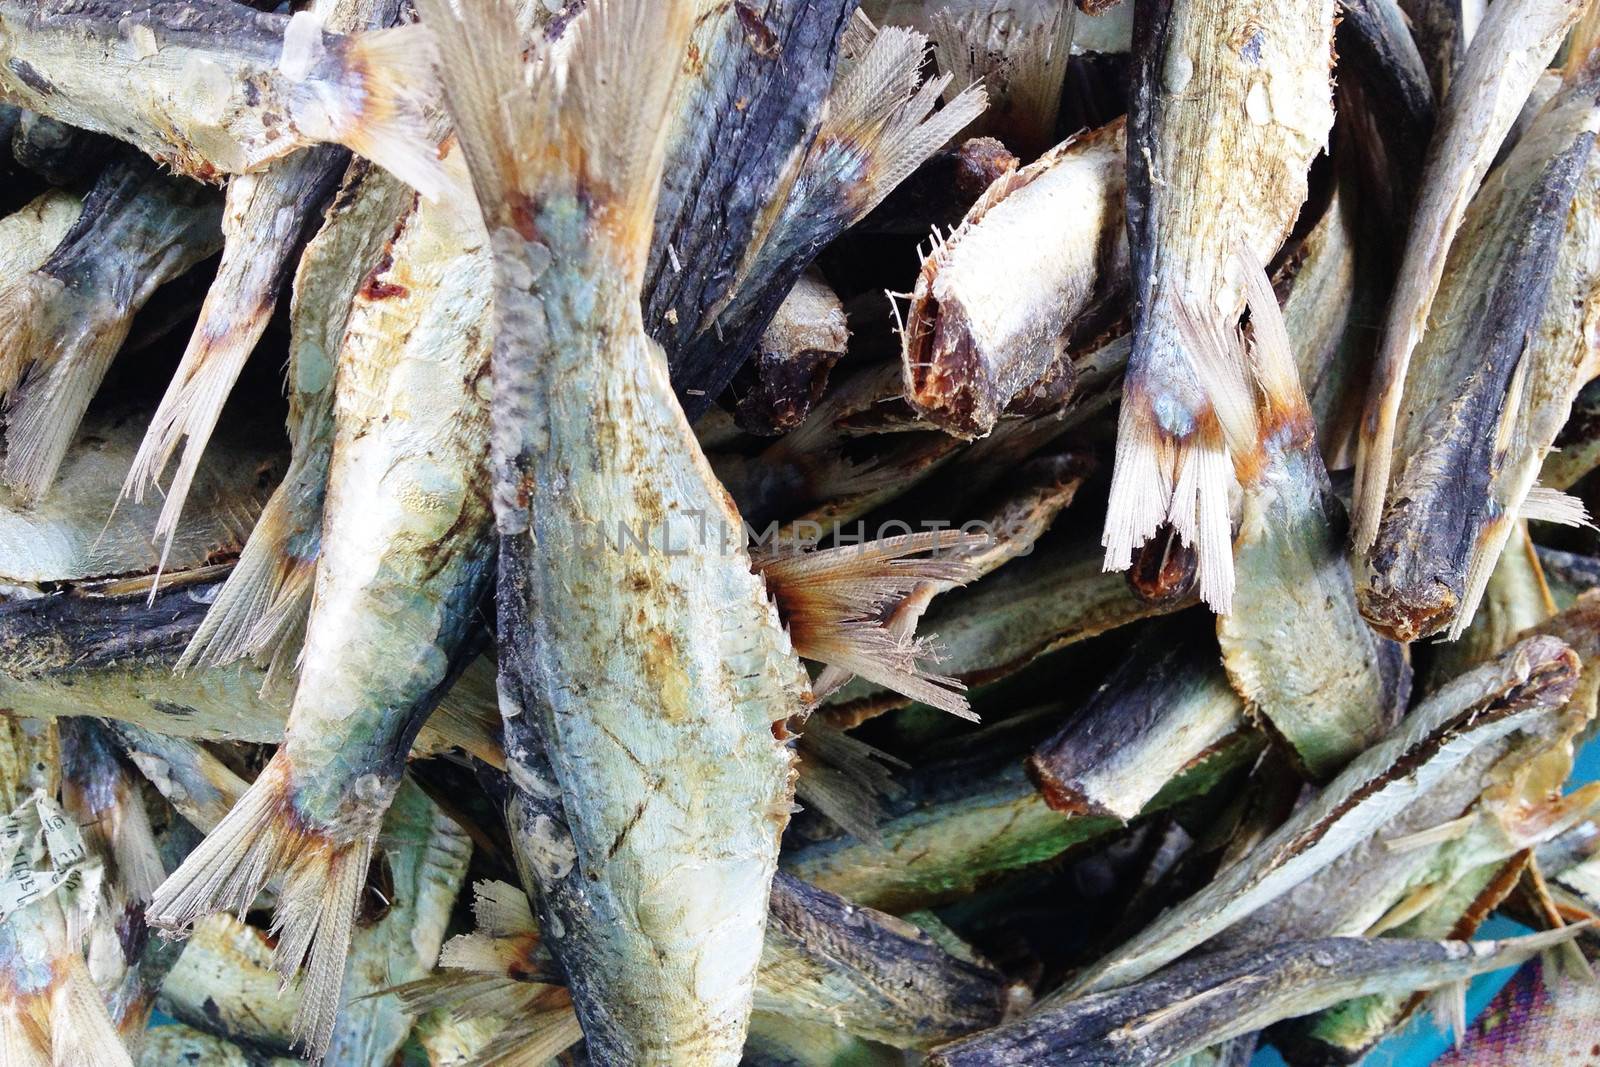 dry salted fish Photo captured with an iPhone